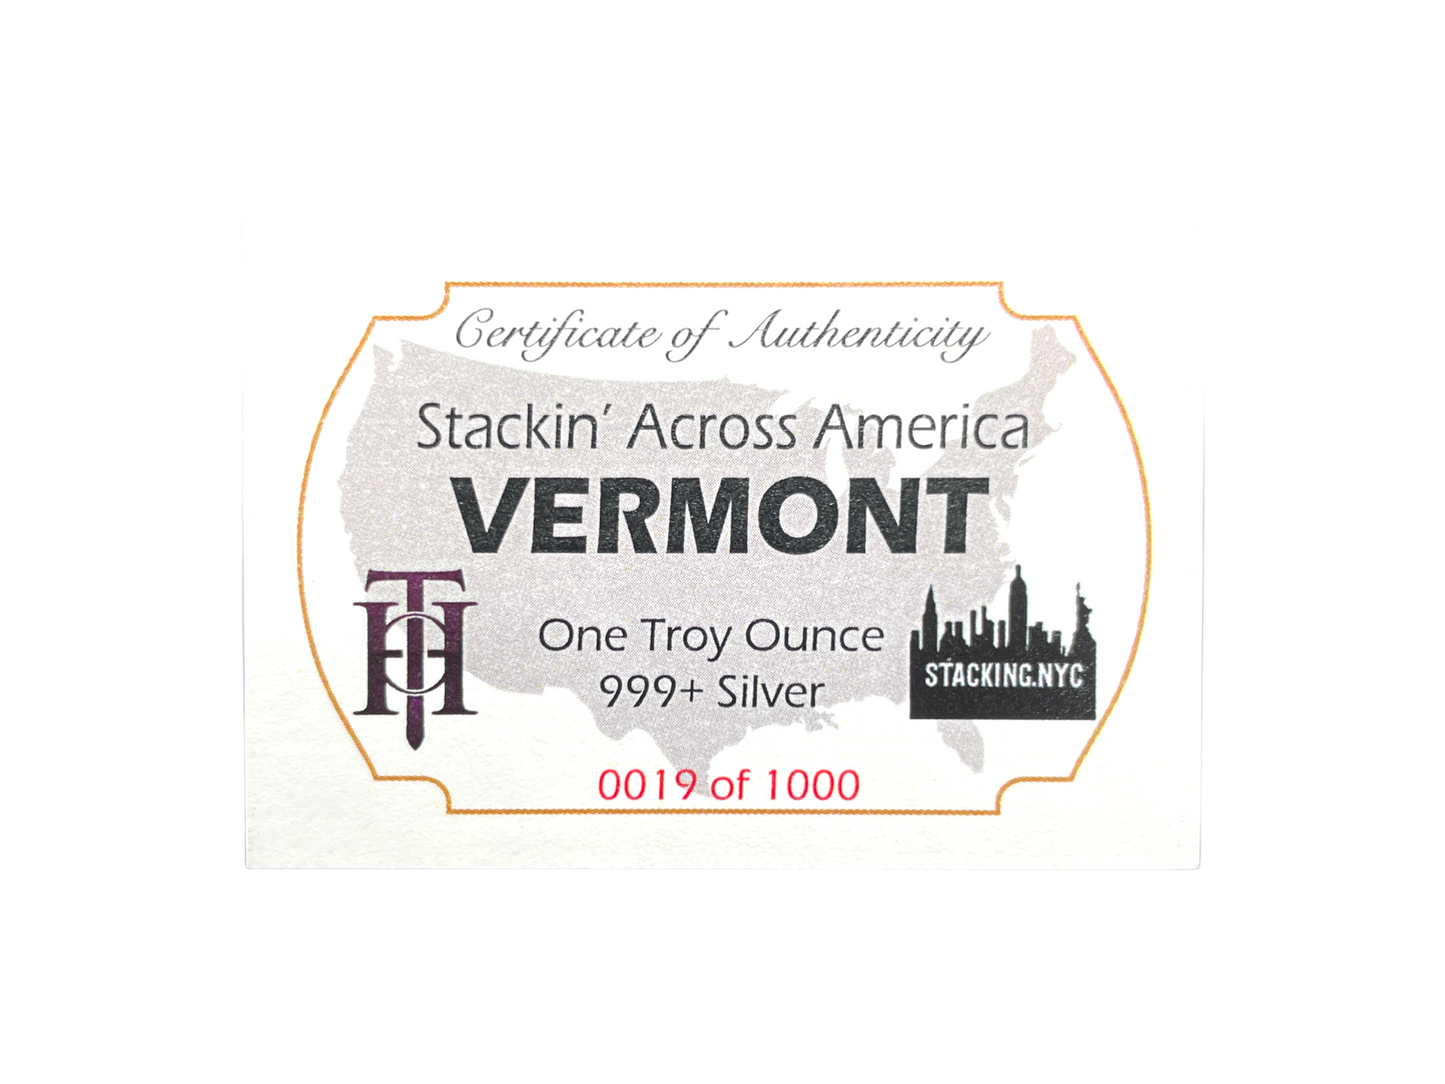 STACKING Vermont